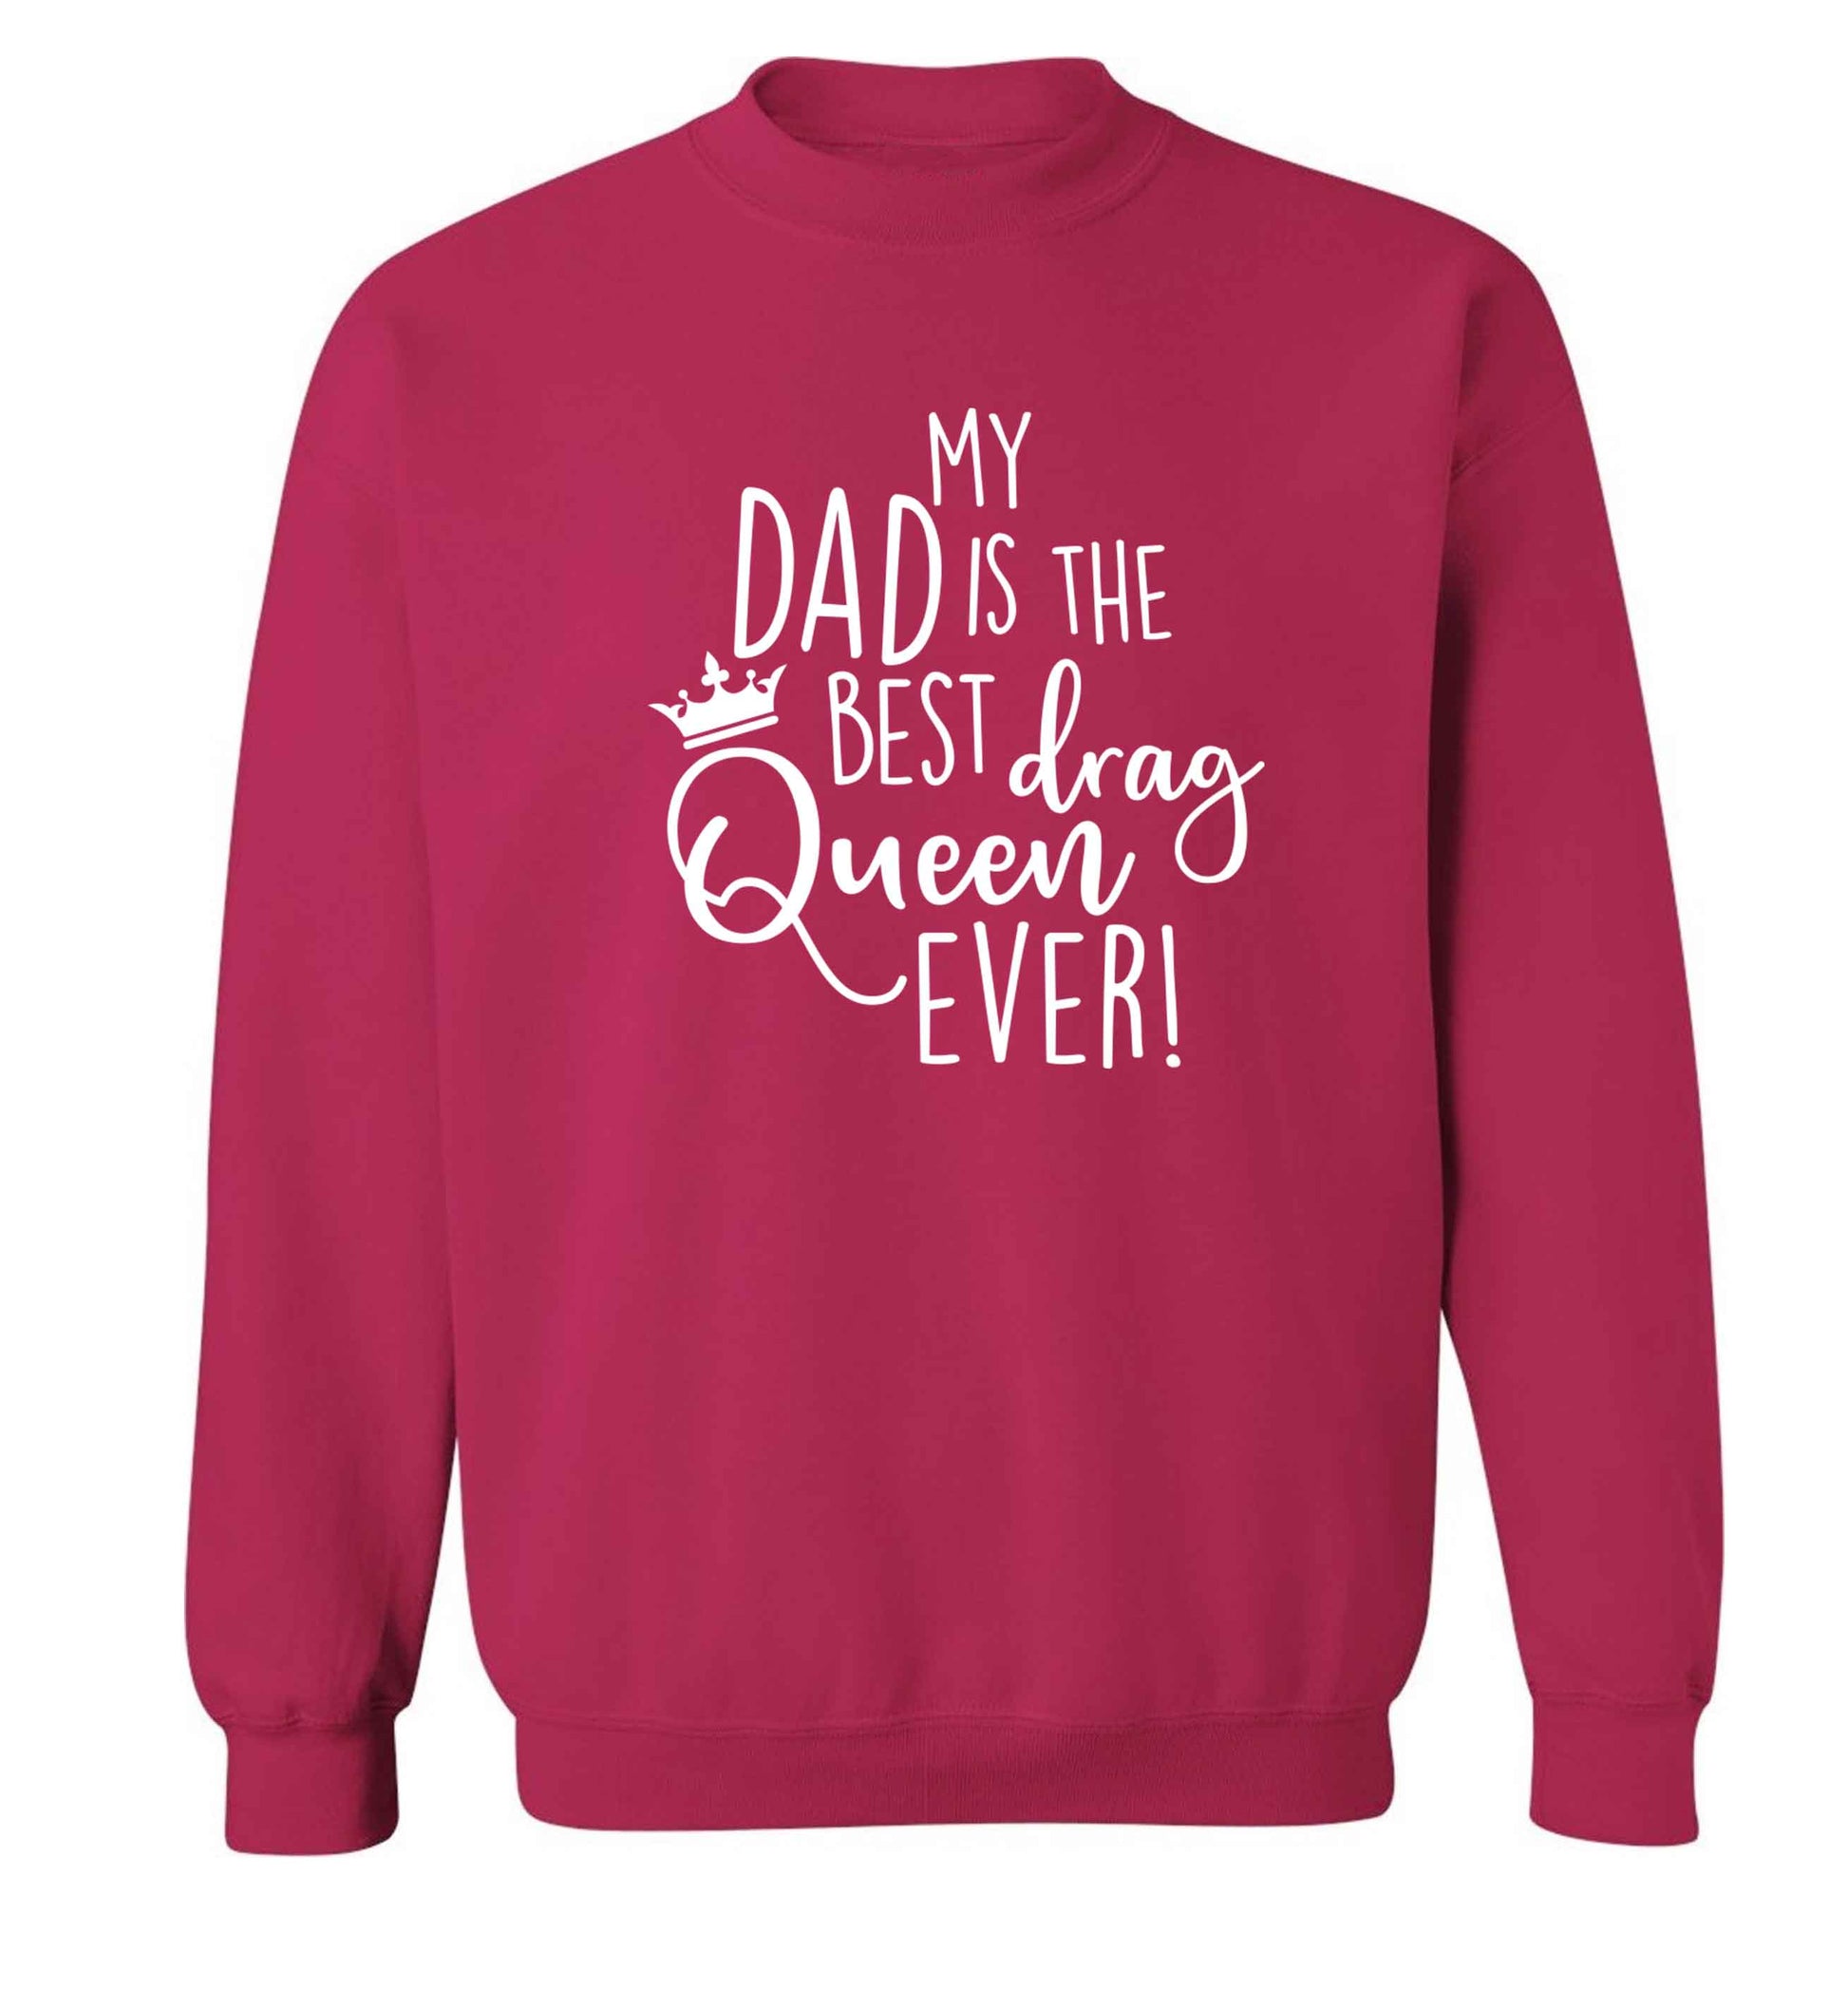 My dad is the best drag Queen ever Adult's unisex pink Sweater 2XL